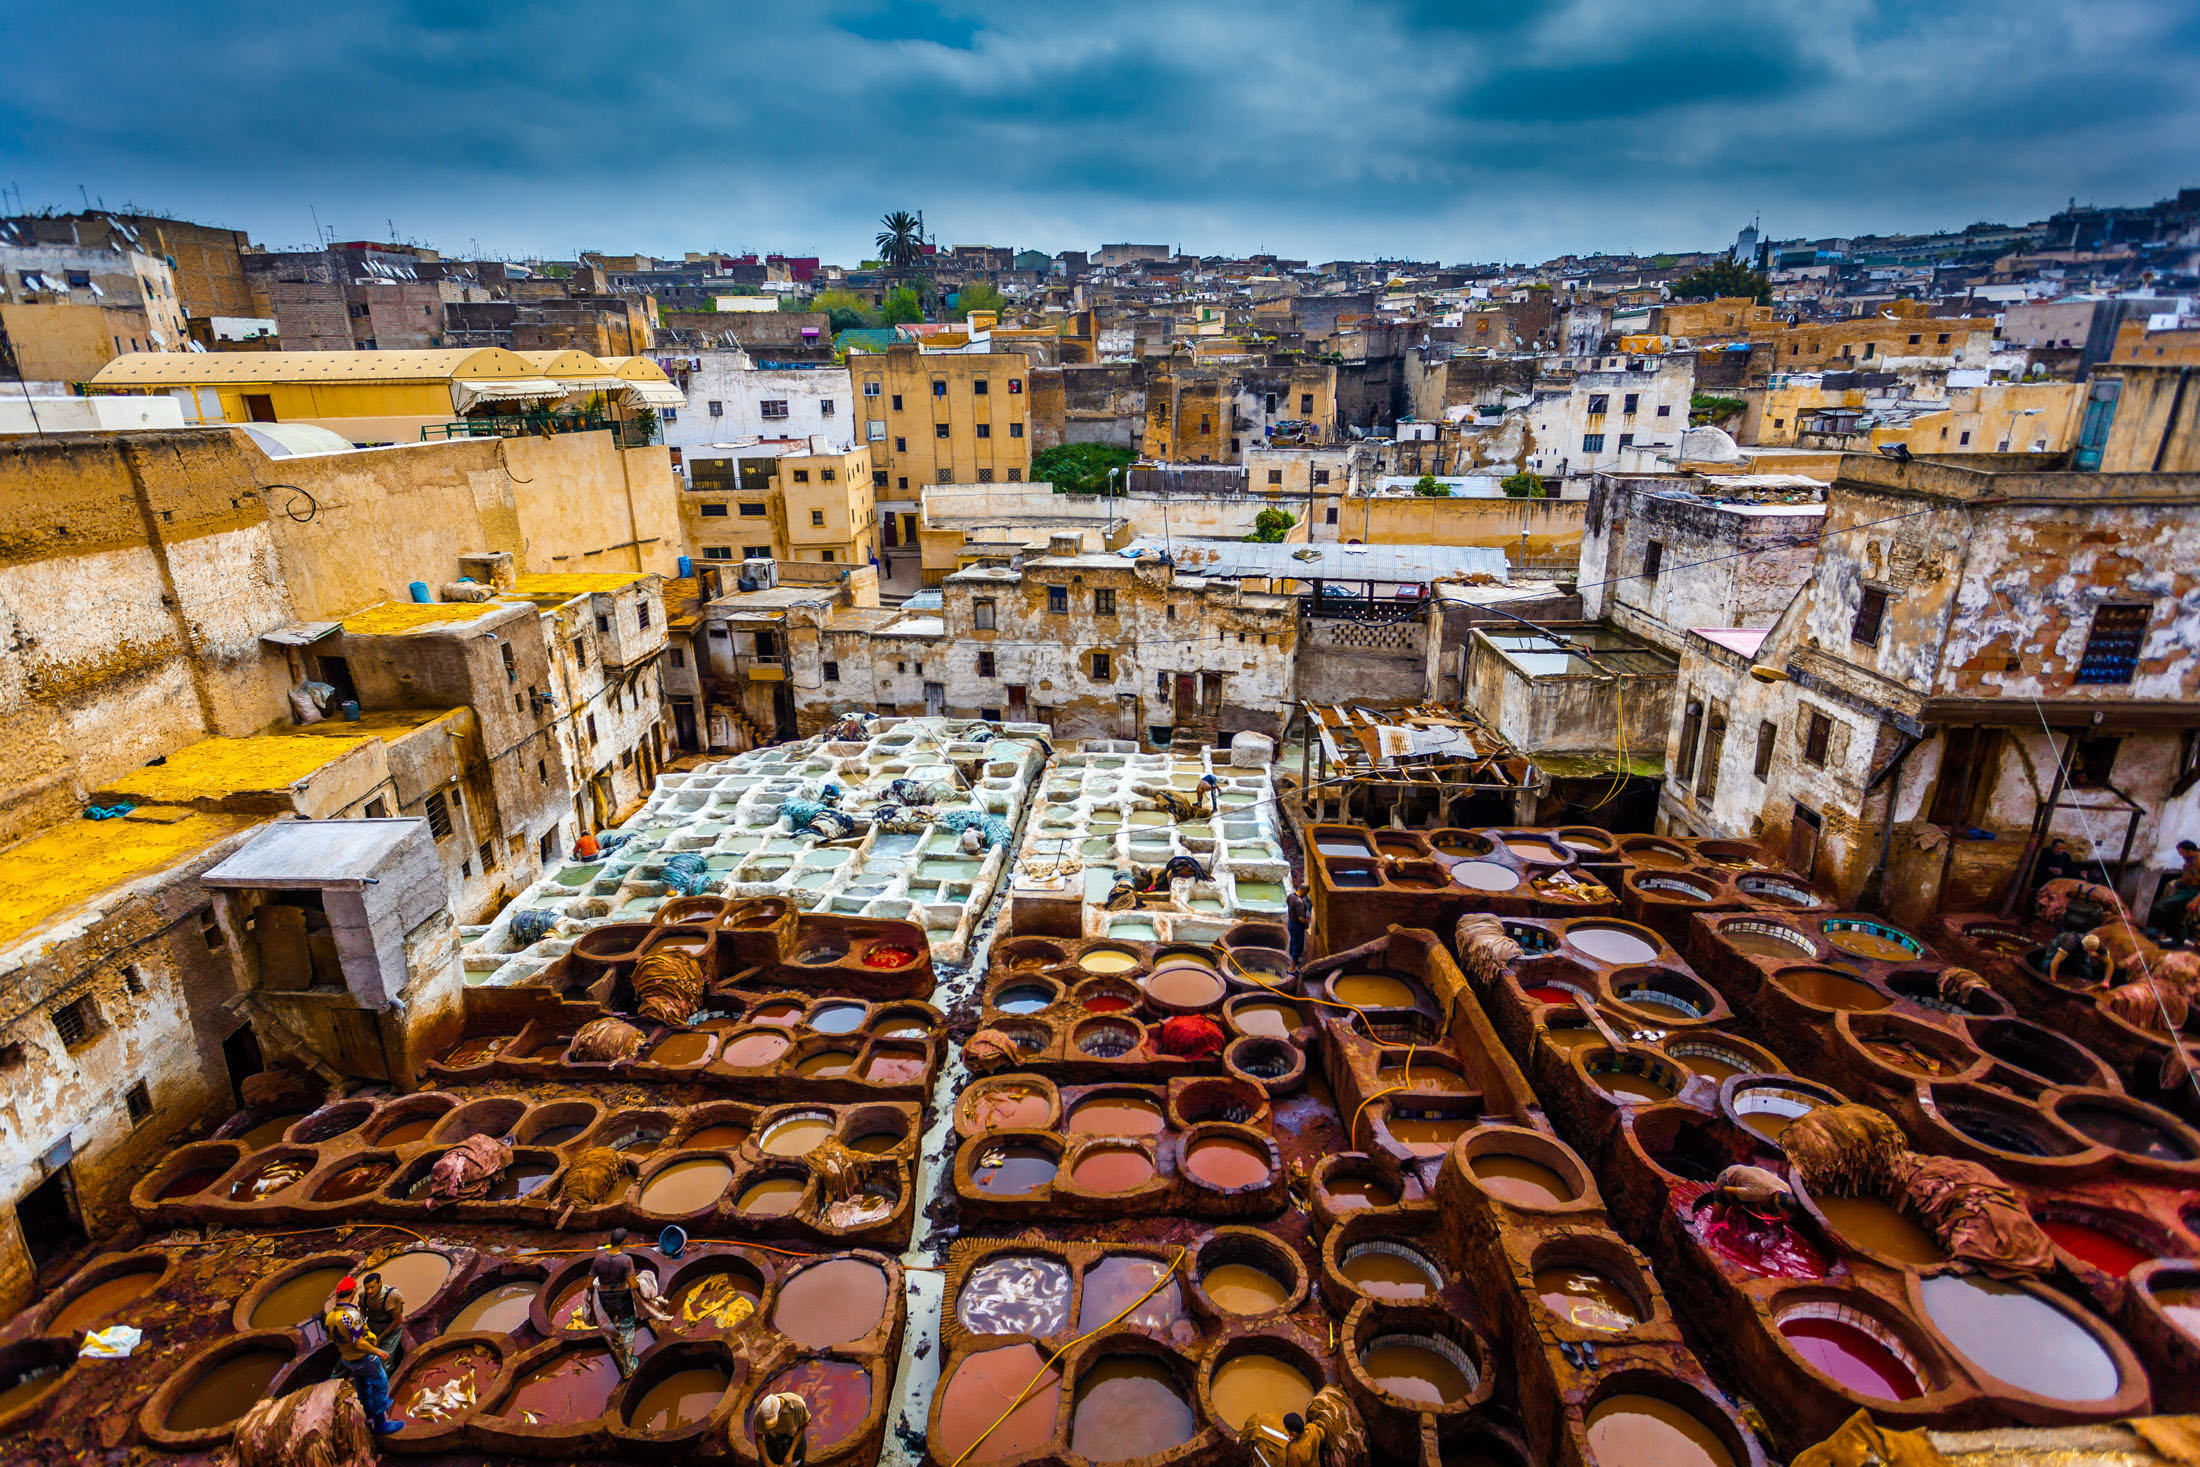 IMPERIAL CITIES IN RIADS